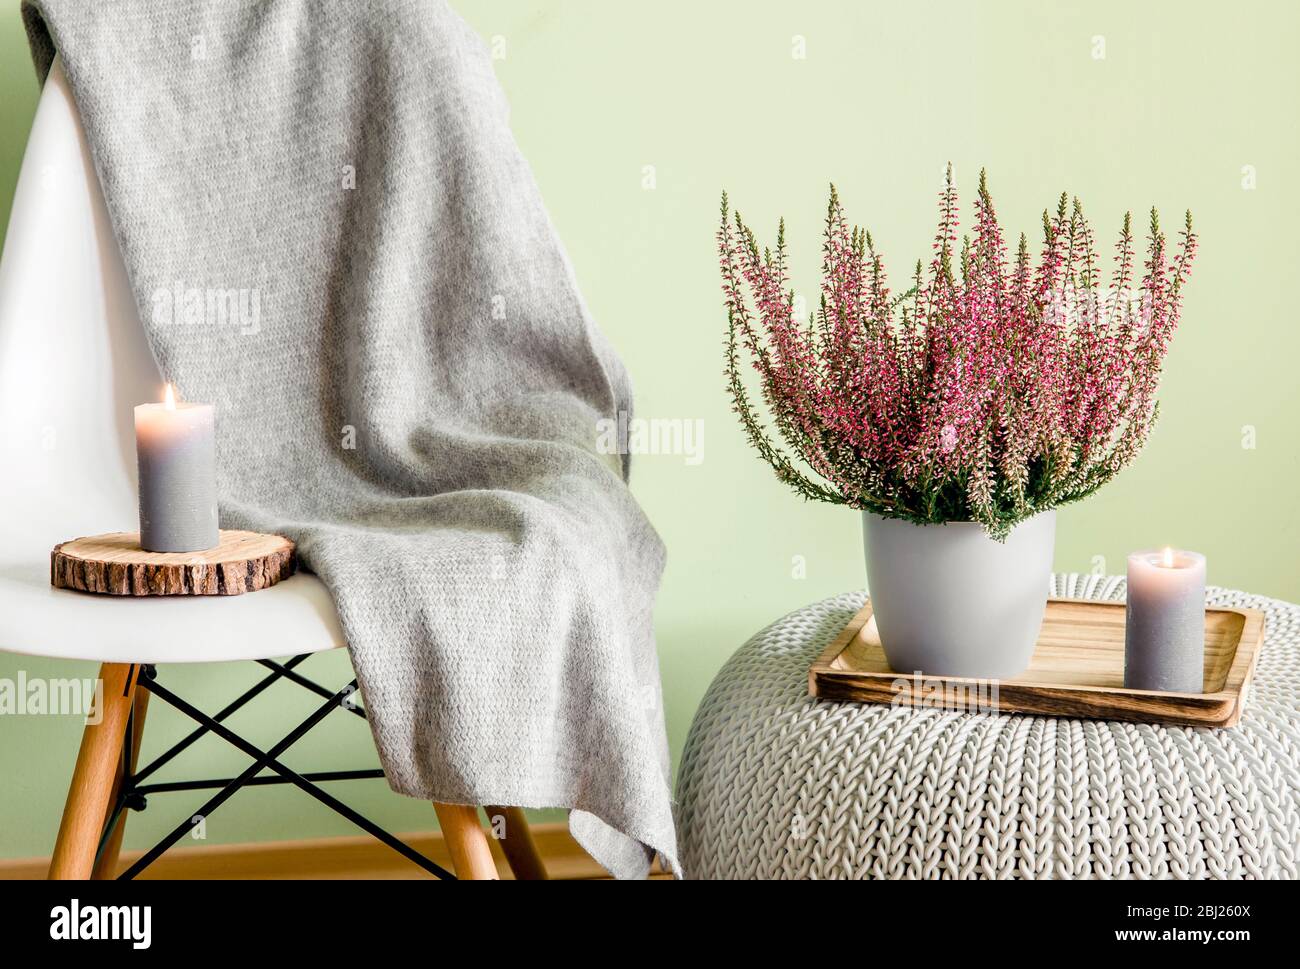 Common pink heather, Calluna vulgaris, ling flower in white pot with gray cozy plaid. Cozy autumn living space concept. Candlelight flame. Stock Photo